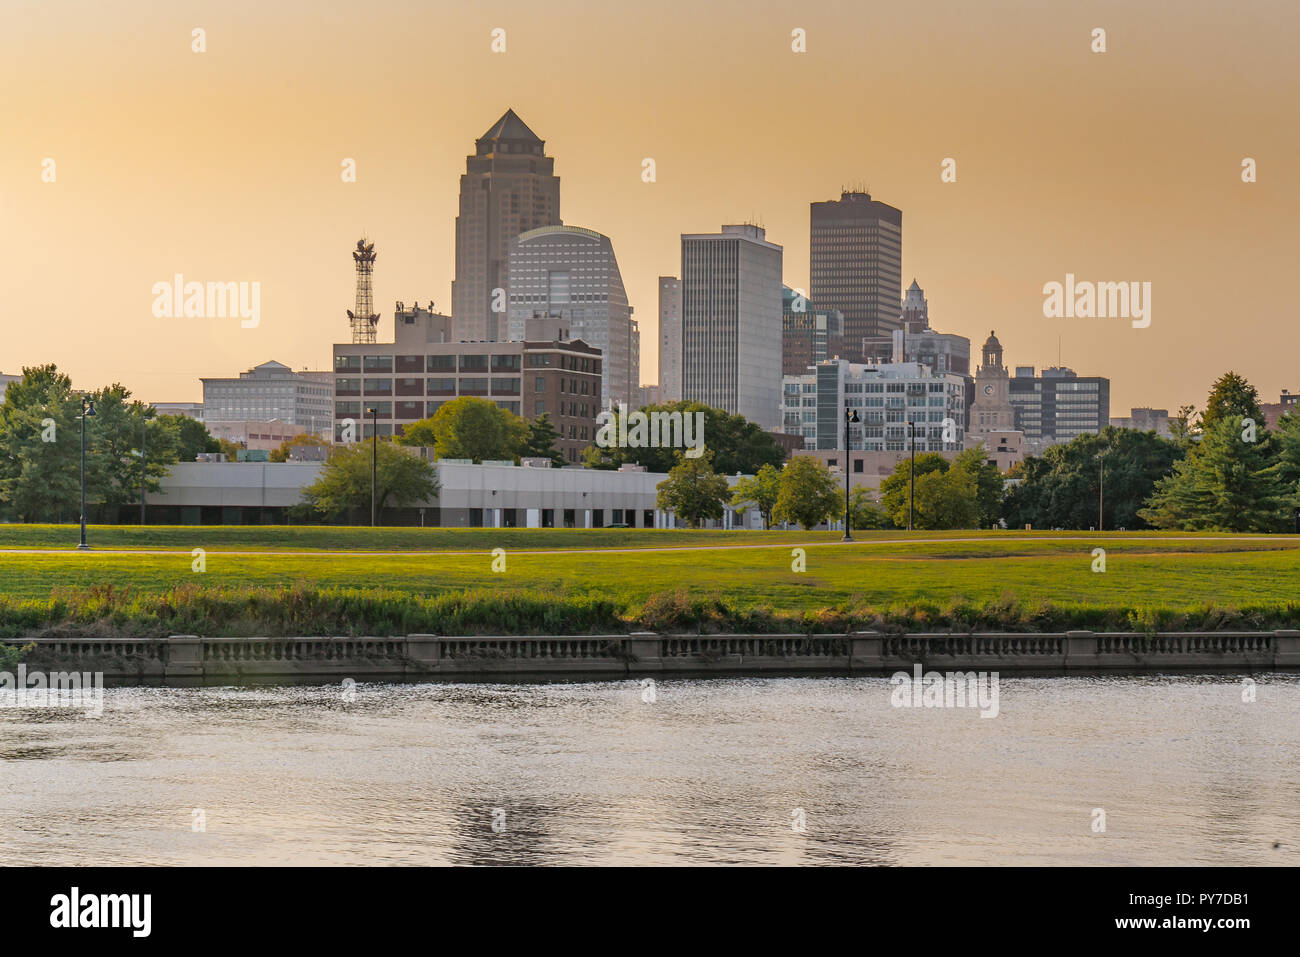 City skyline of Des Moines, Iowa across the Racoon River at sunset Stock Photo